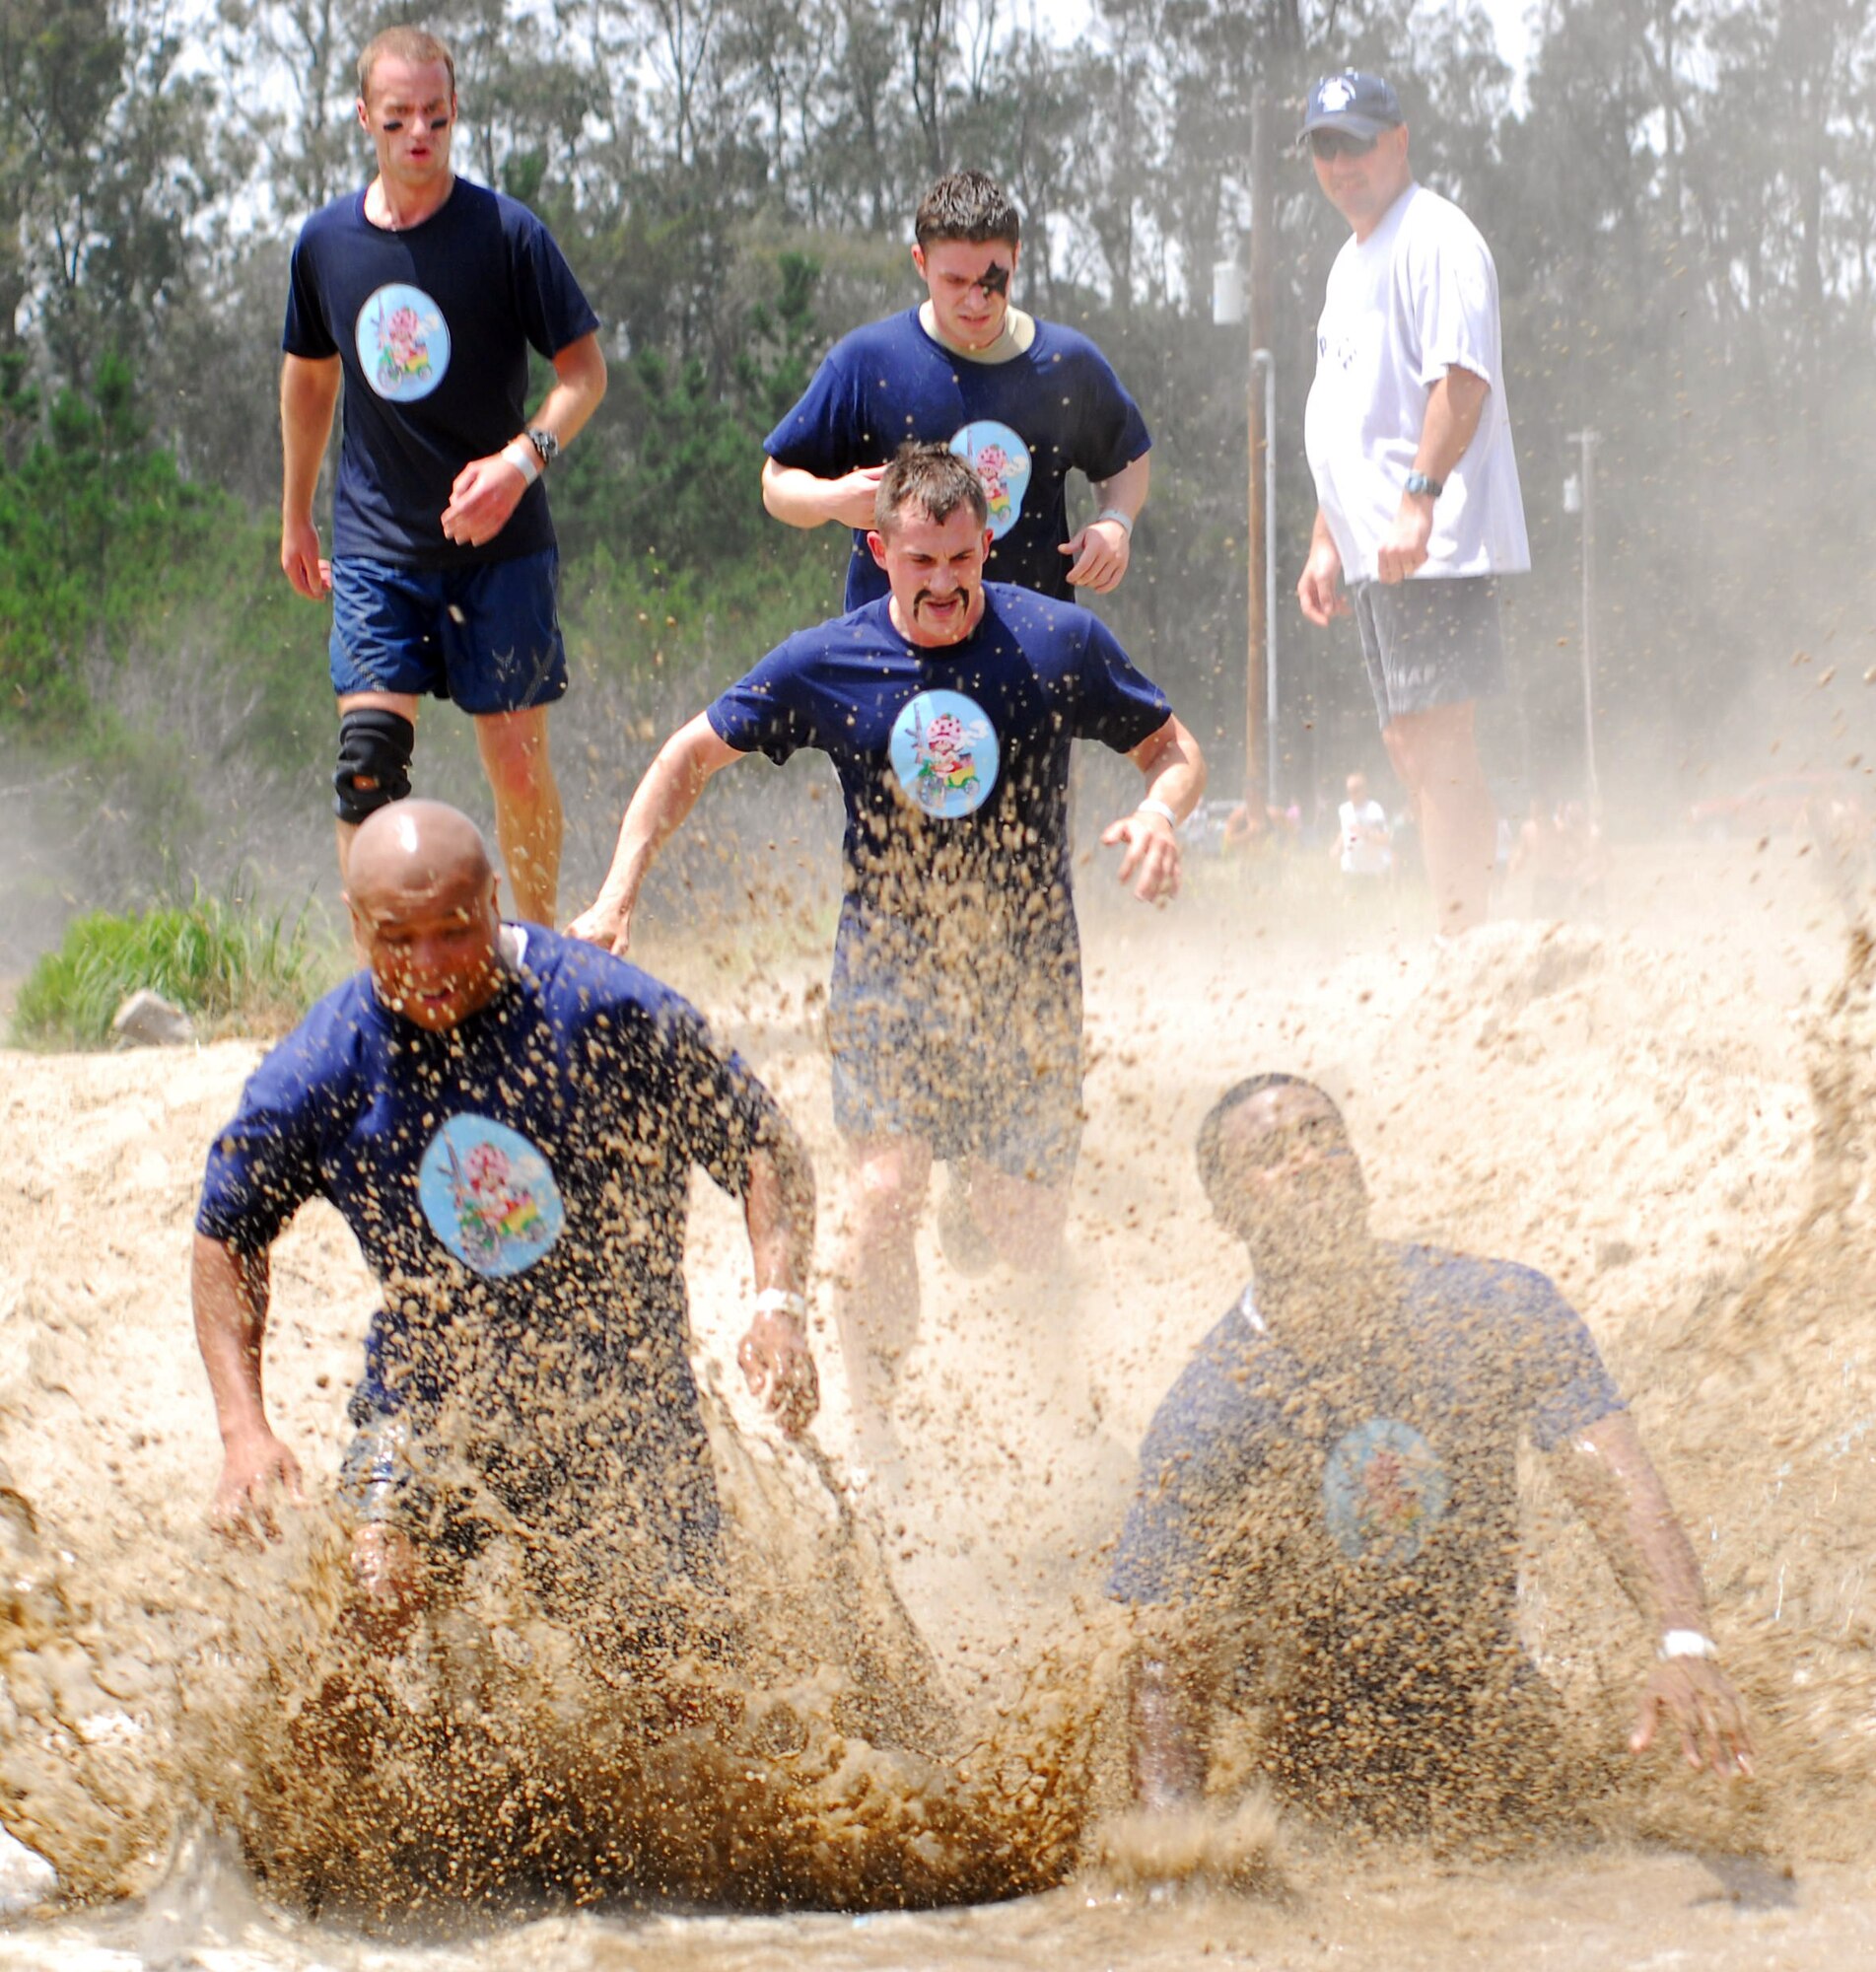 VANDENBERG AIR FORCE BASE, Calif. -- Hitting the pit running, members of Team V take part in the Vandenberg Warrior Challenge Mud Run on June 30 at Cocheo Park here. “The course was designed to test the physical and mental toughness needed to build warrior ethos, which is the foundation of what it means to be an Airman," said Master Sgt. Patrick Dutkevitch, the Vandenberg Mud Run coordinator. (U.S. Air Force photo/Airman 1st Class Kerelin Molina) 